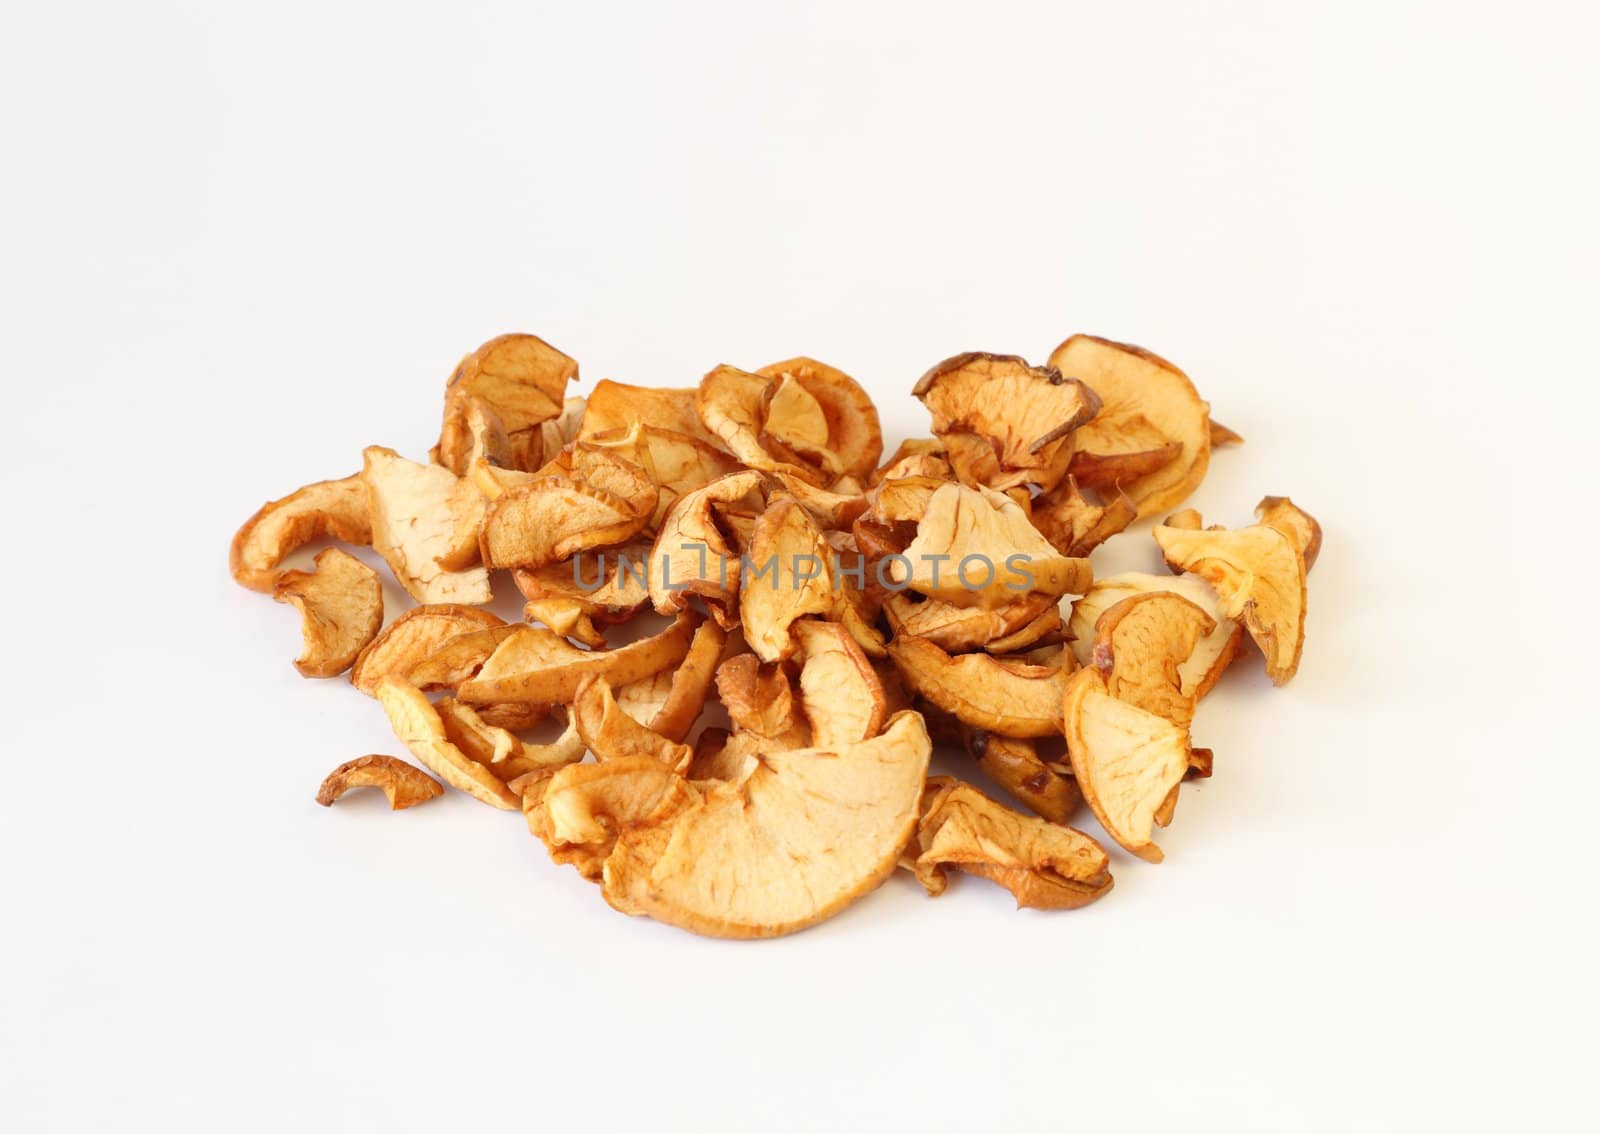 dried apples on white background